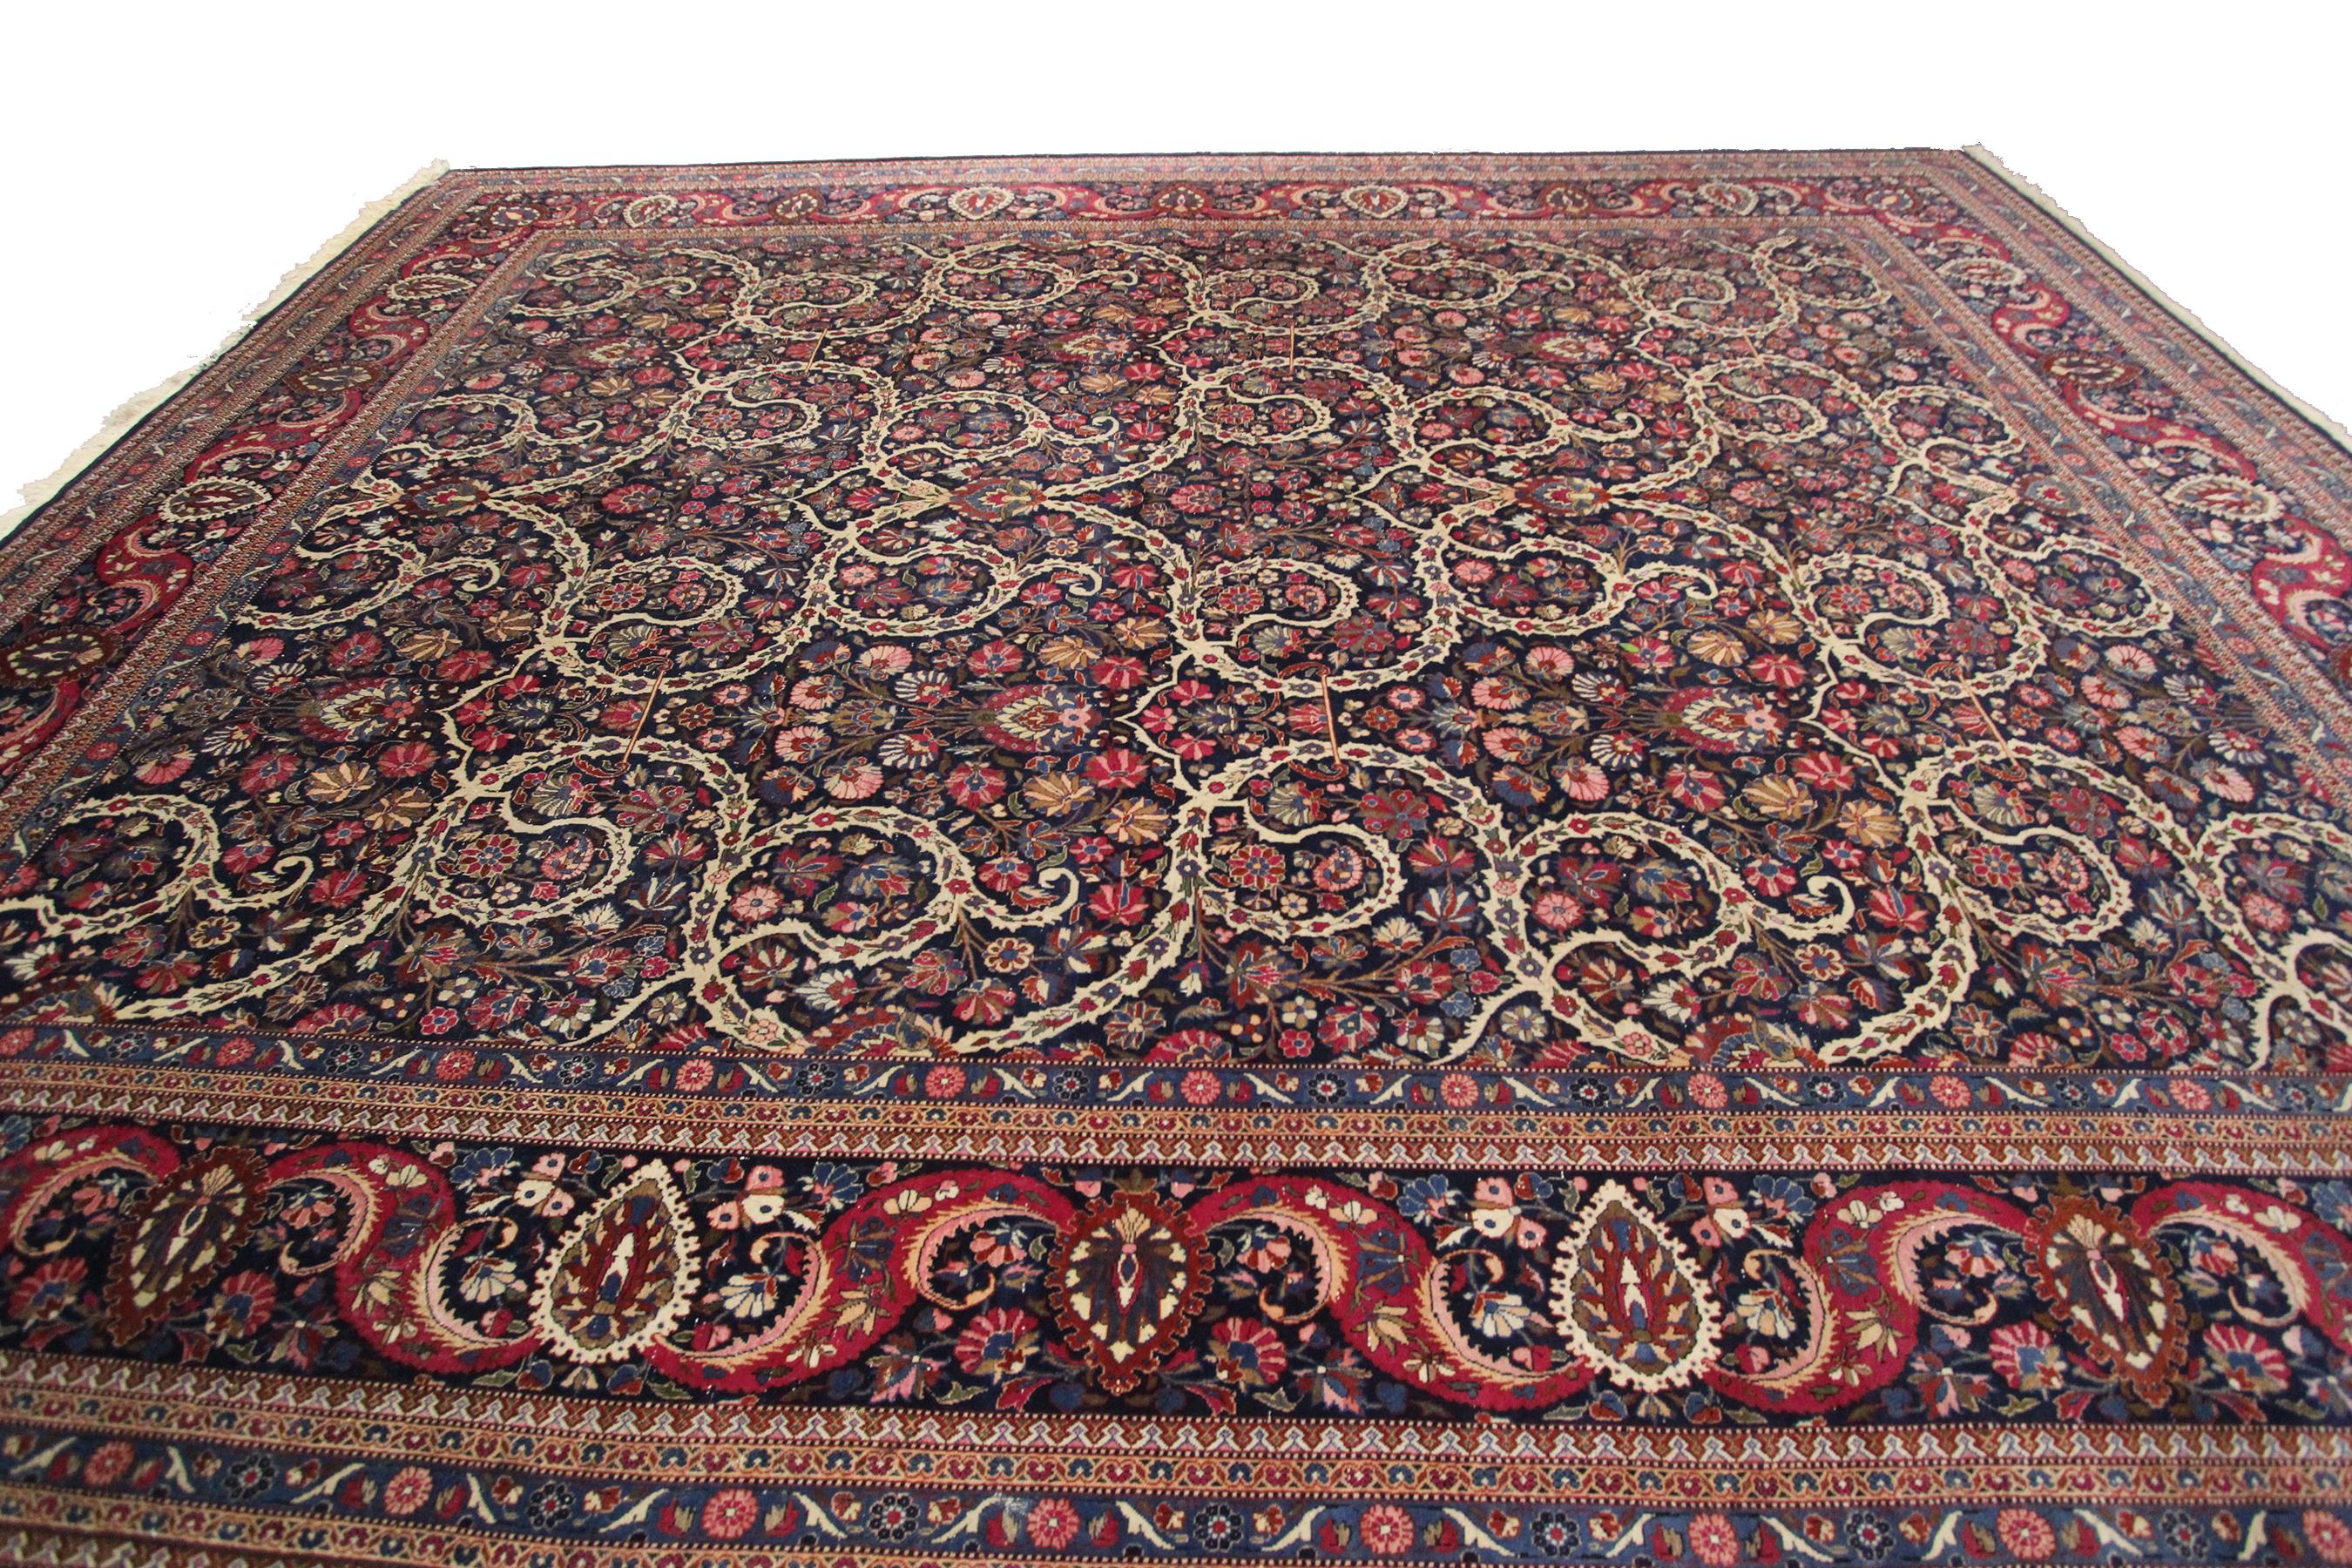 Early 20th Century Antique Persian Dabir Kashan Rug Kork Wool Geometric Overall 11x14 Blue For Sale